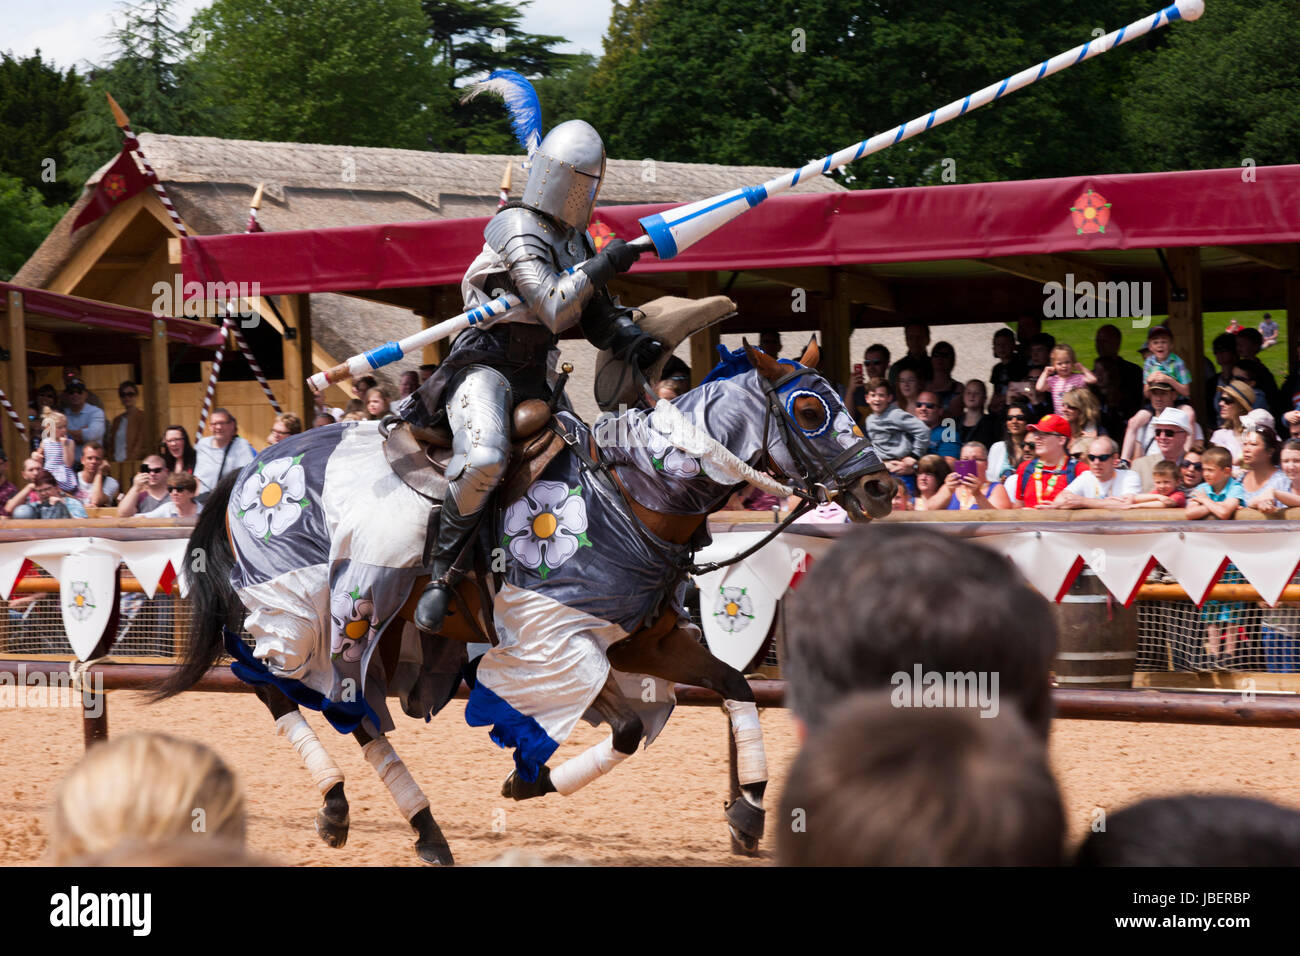 War of the Roses jousting battle re-enactment performed in front of an  audience of tourists at Warwick castle in Warwickshire. UK. (88 Stock Photo  - Alamy